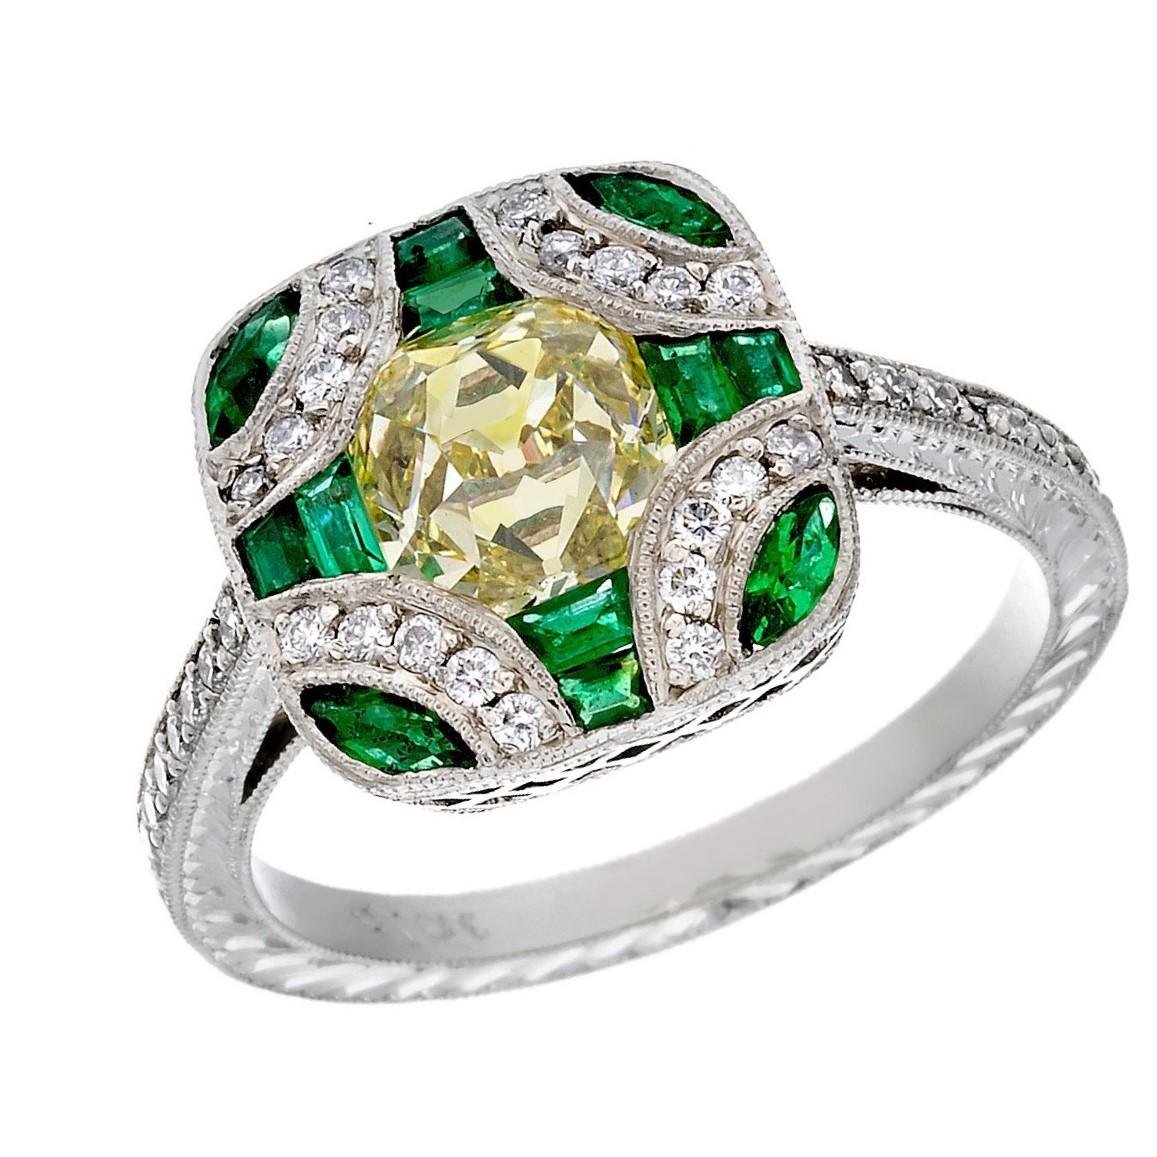 Antique Edwardian Style Fancy Yellow Old Mine Cut Diamond and Emerald Ring For Sale 1